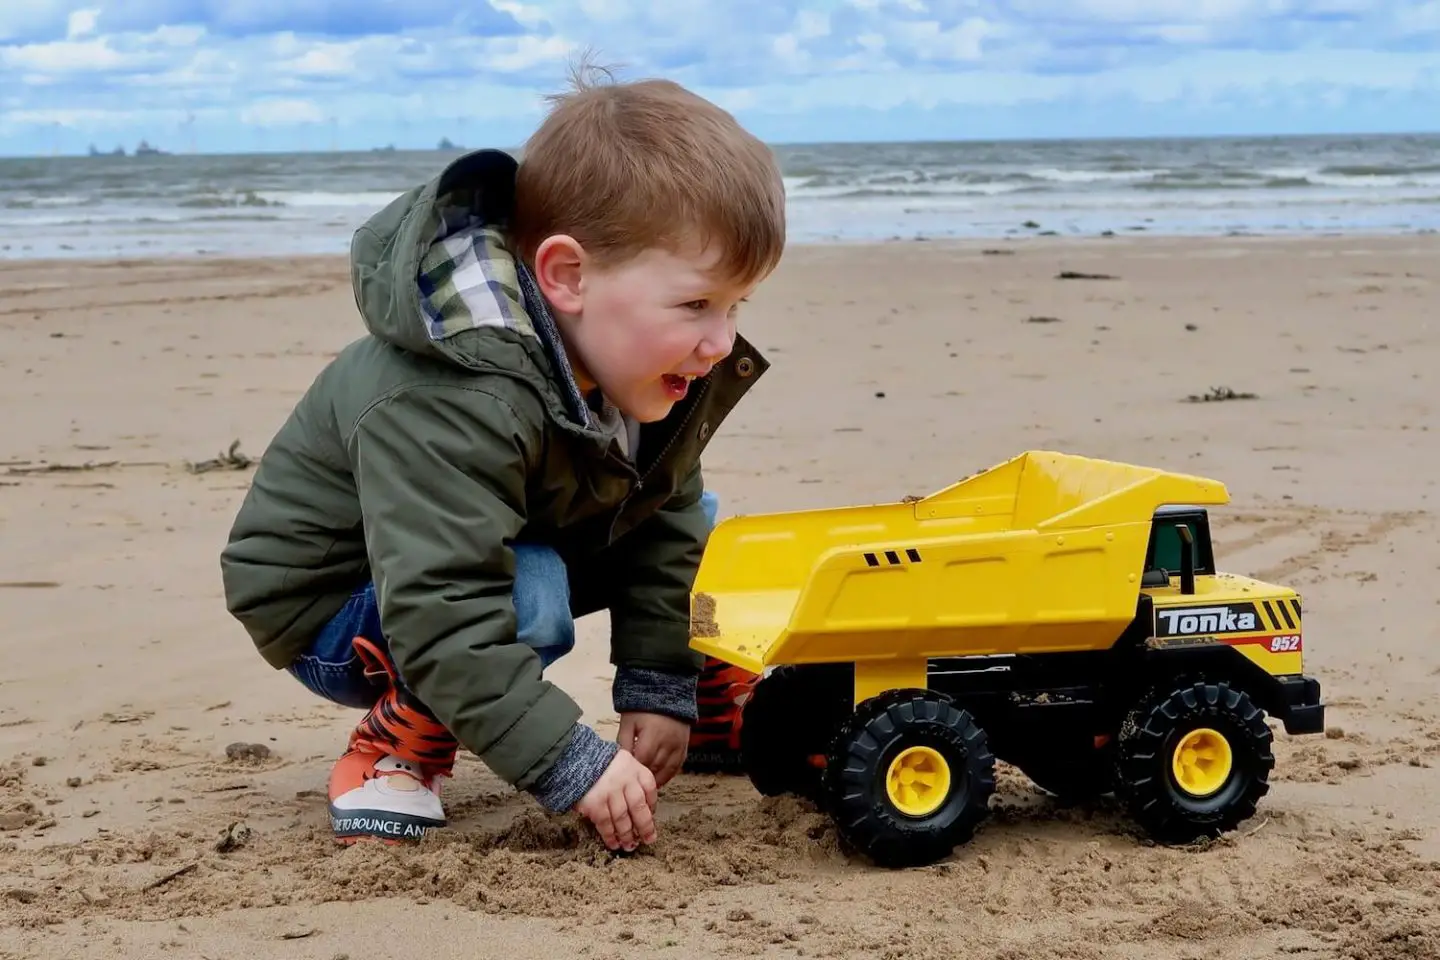 A child crouching next to a yellow toy dump truck on the beach.